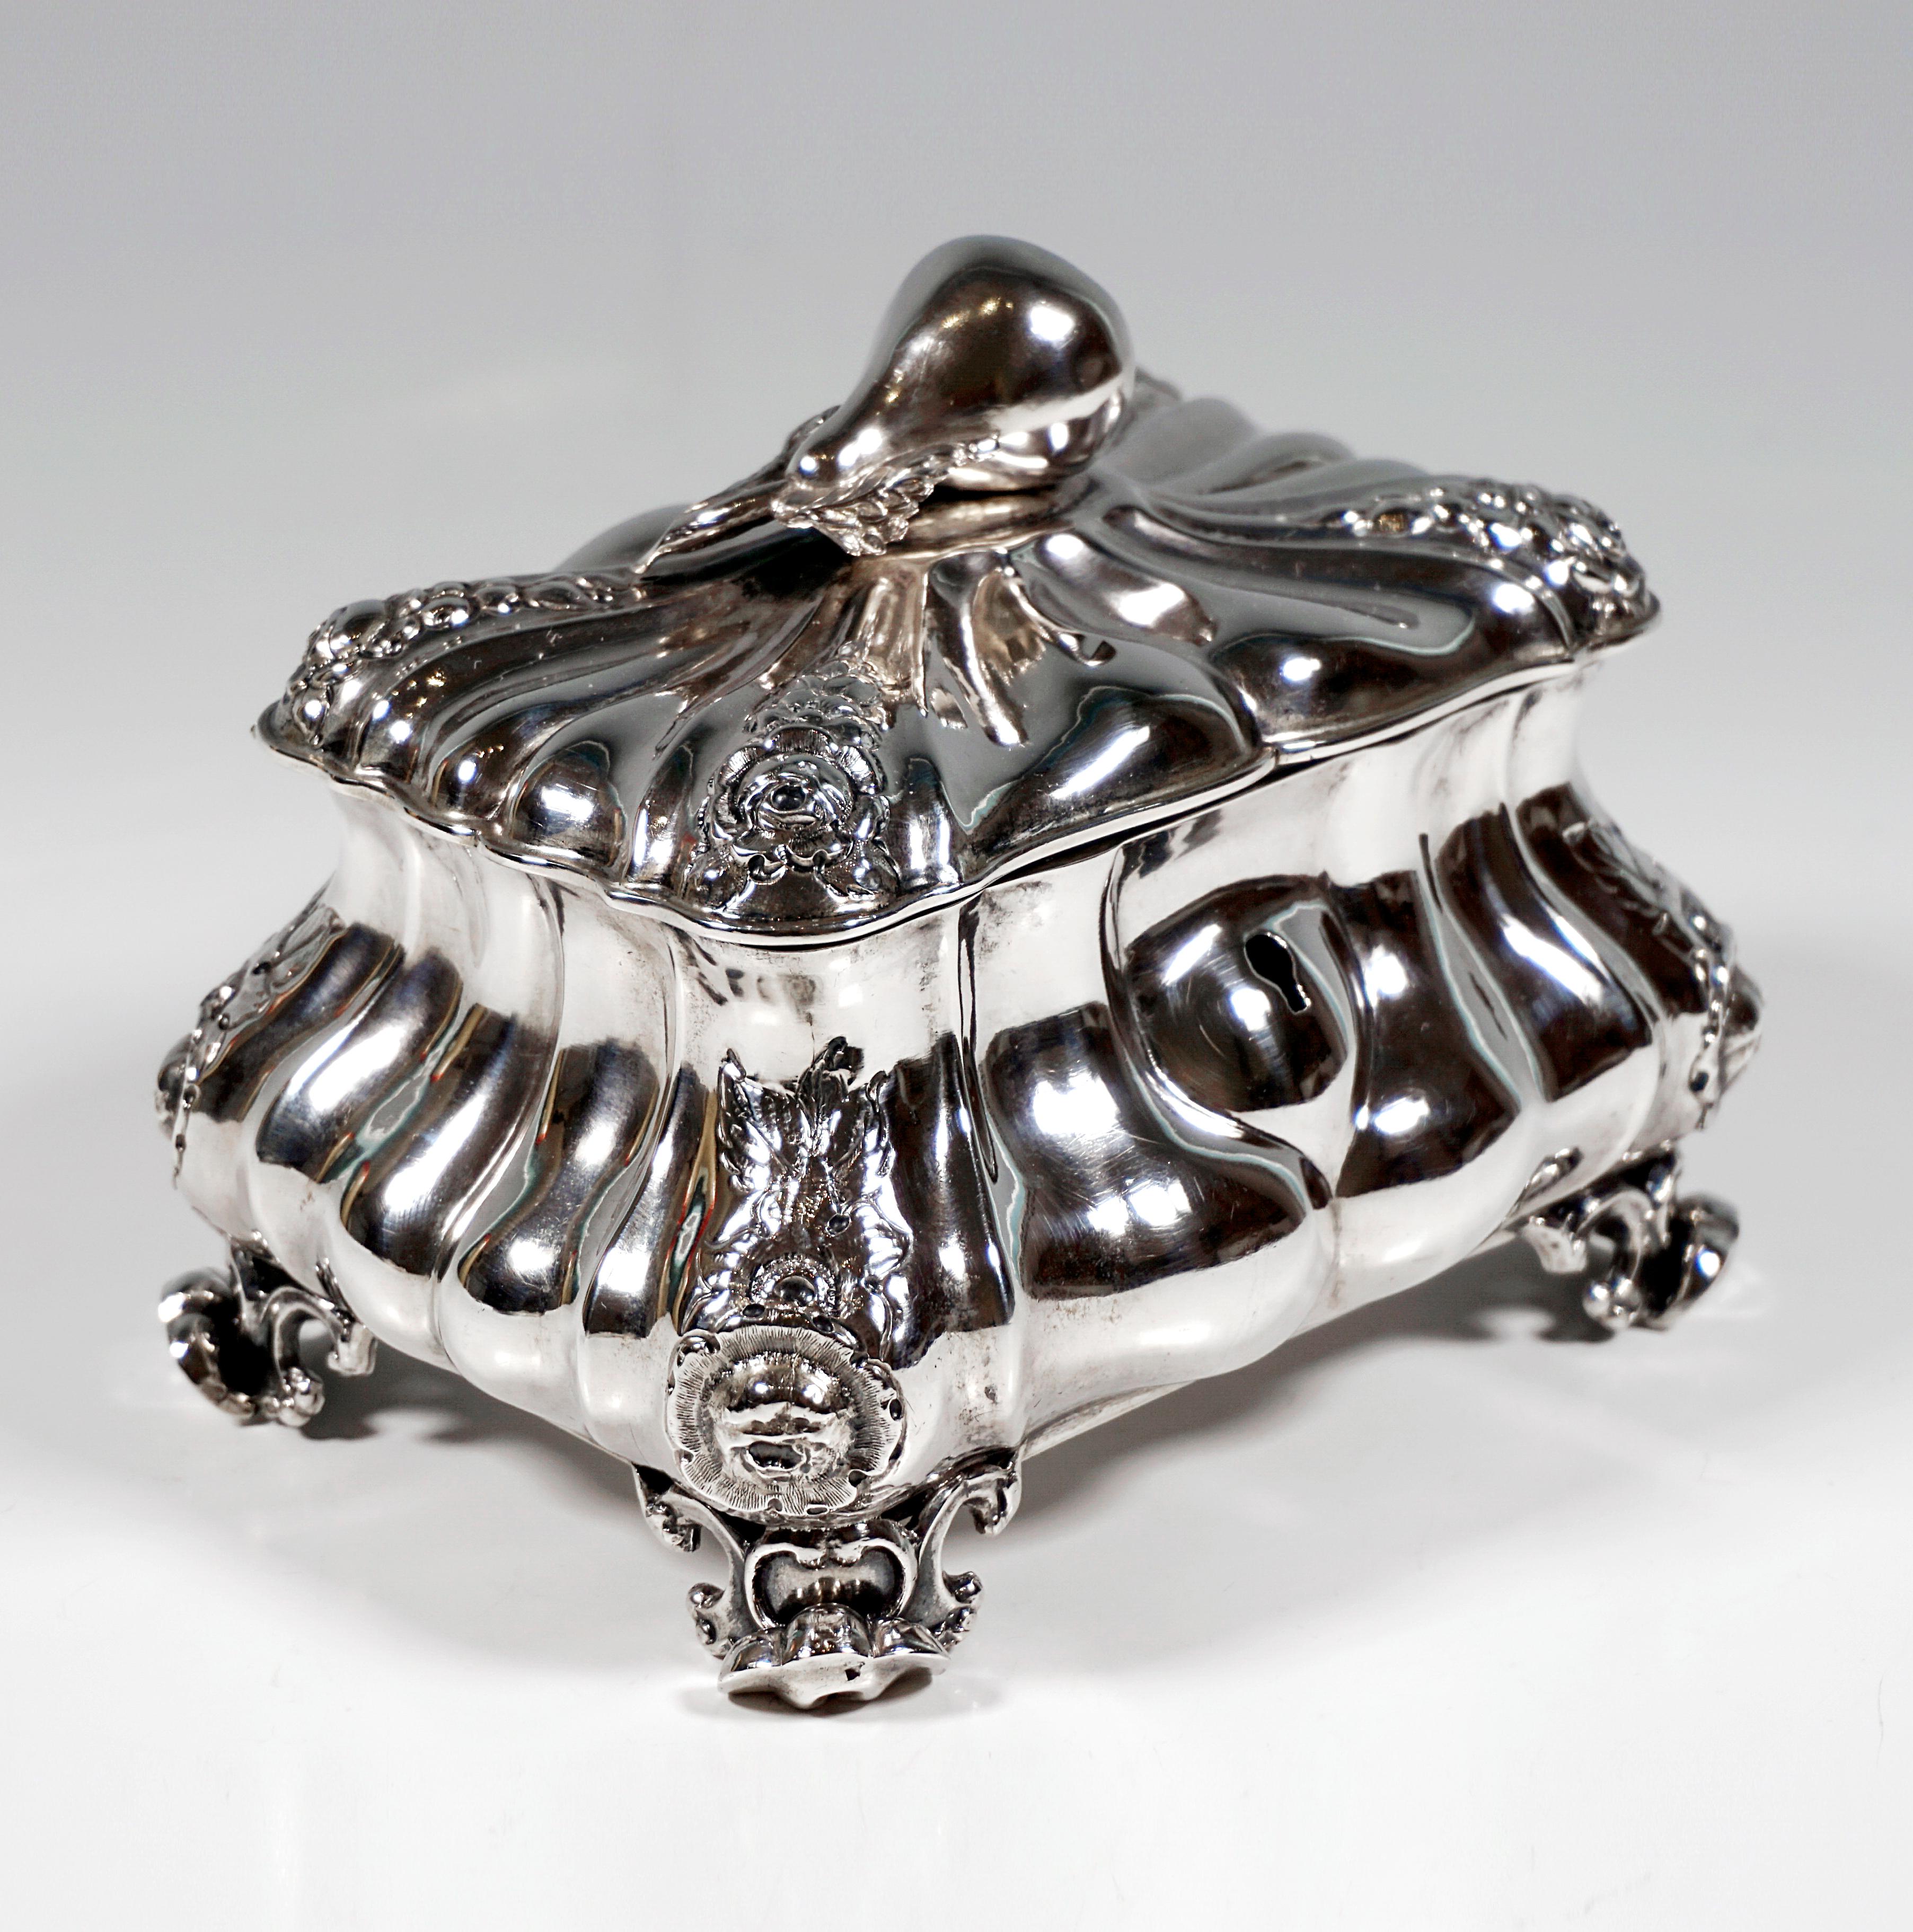 Biedermeier silver sugar bowl in rectangular basic form on four rocaille feet, the walls of the container drawn in towards the top and provided with folds, which run straight on the narrow sides and curved on the wide sides, floral decoration in